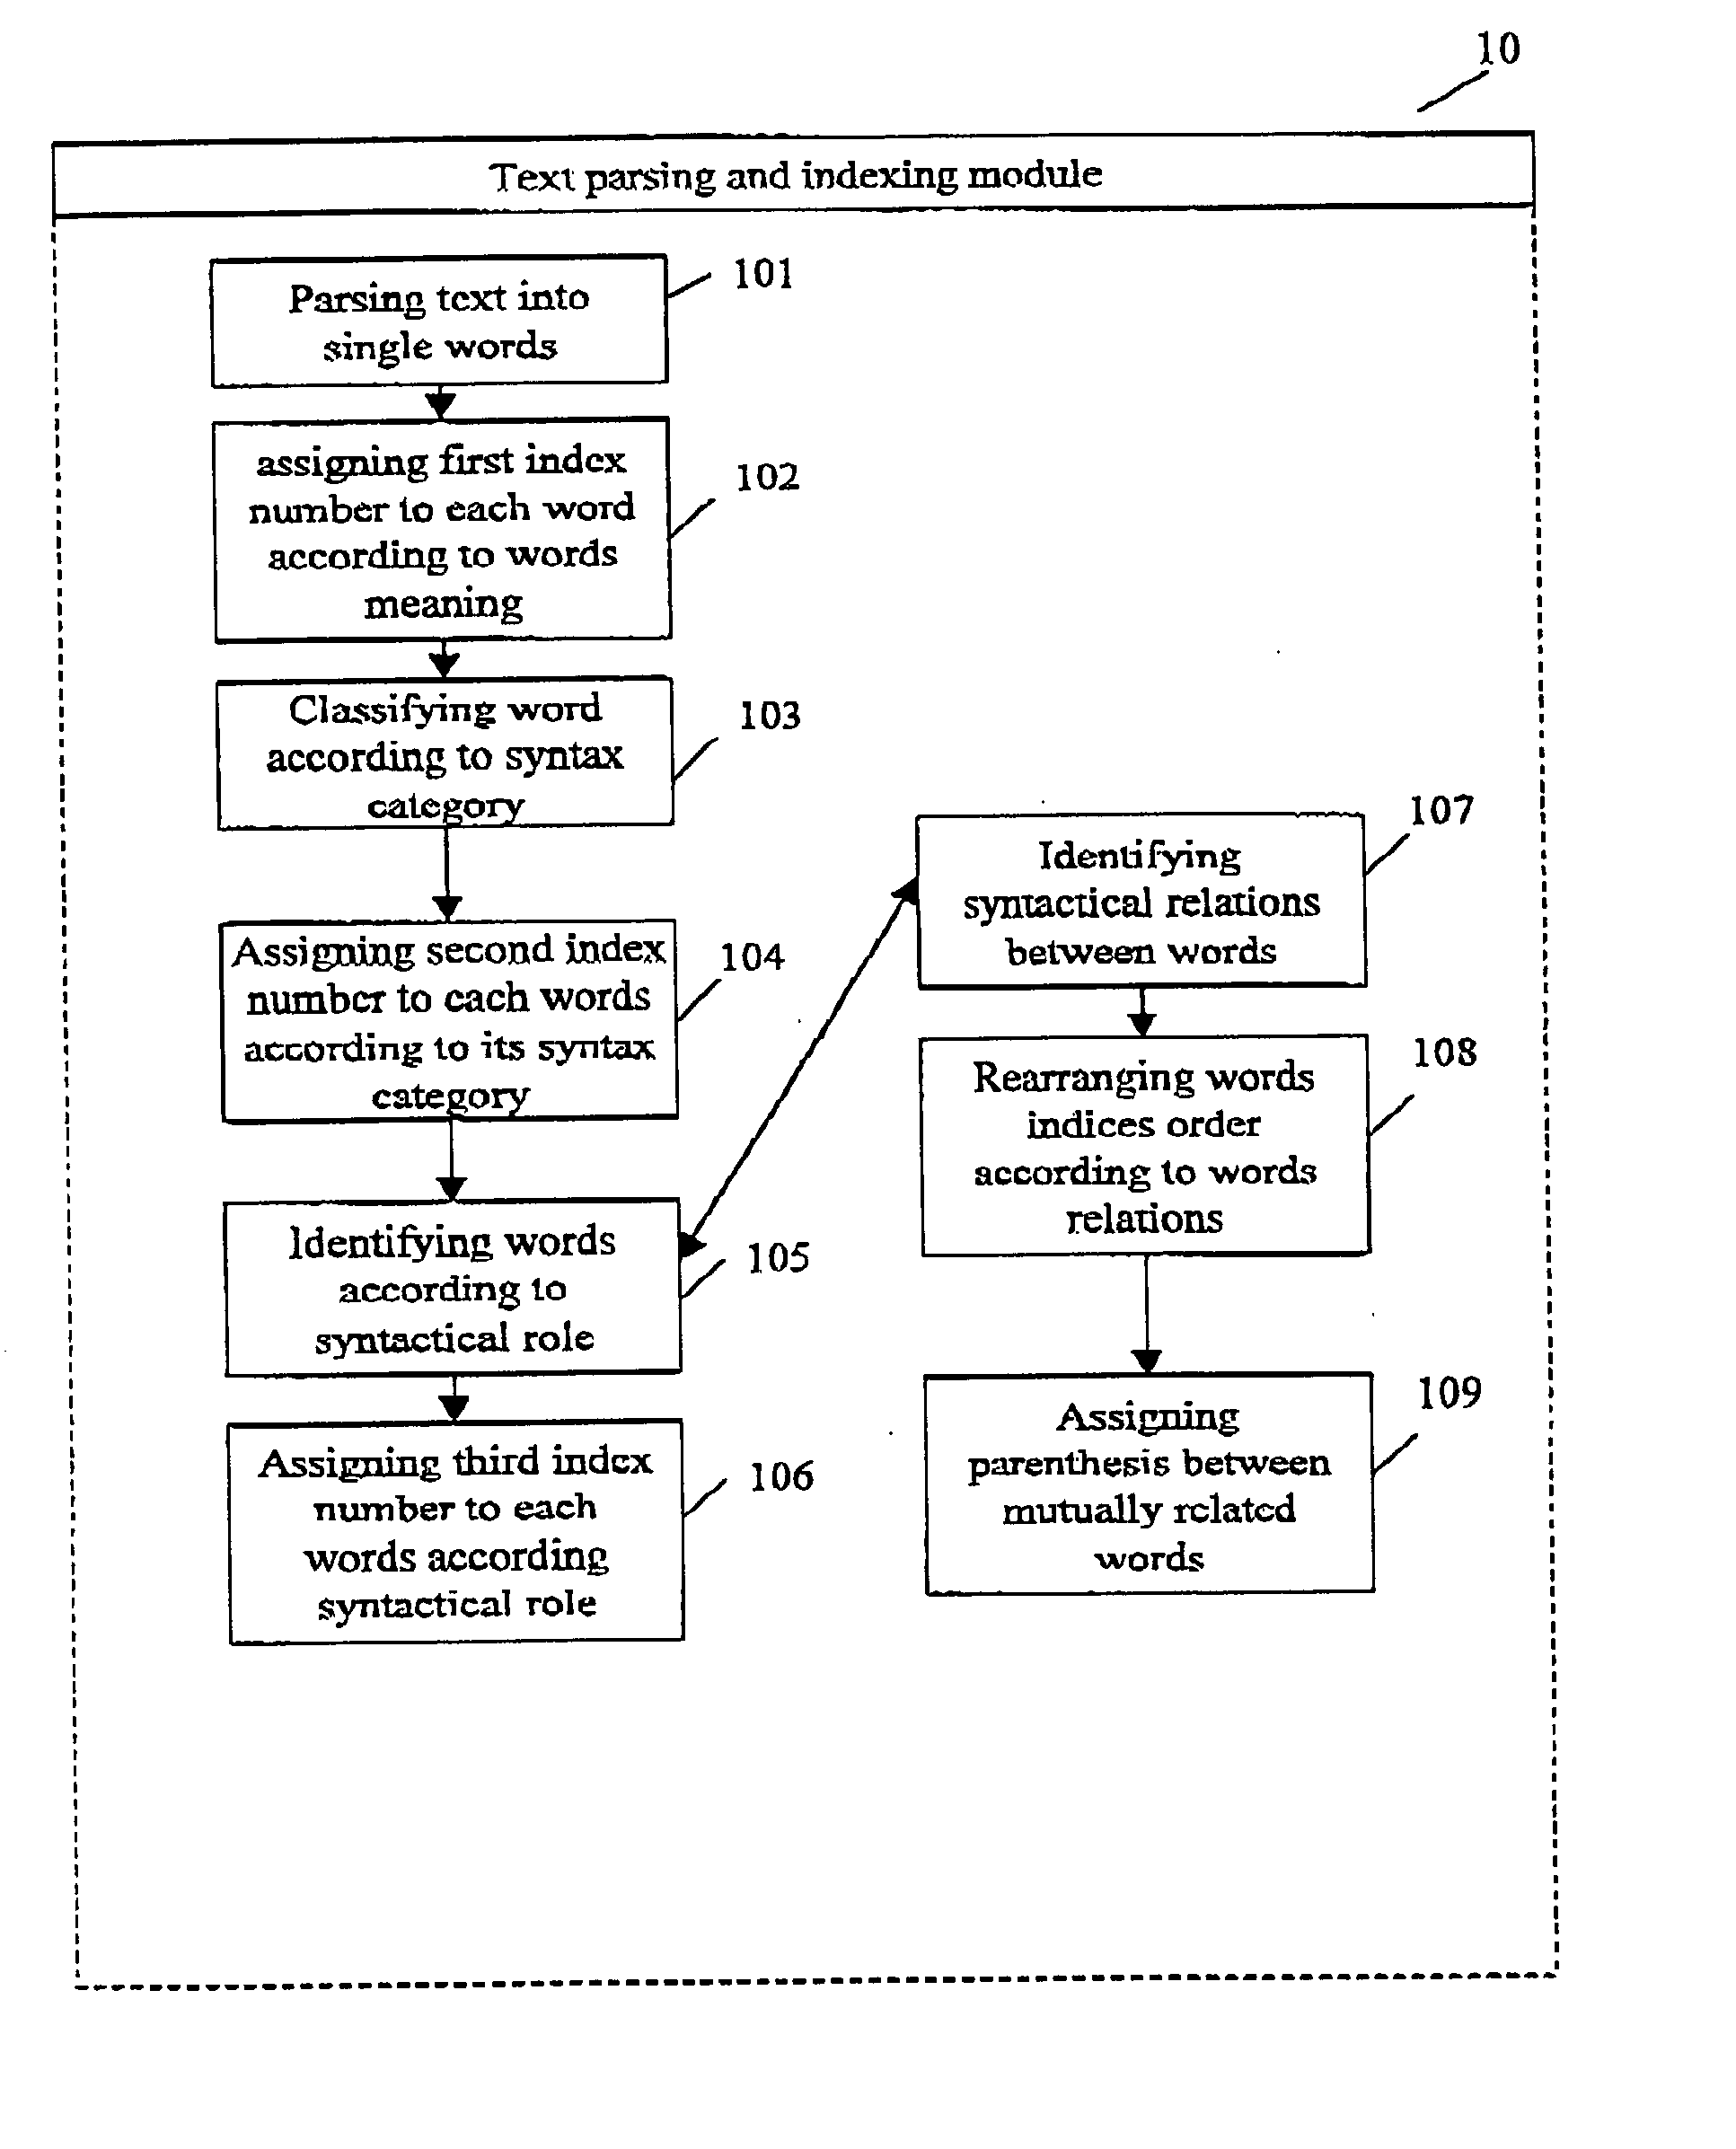 Method and system for smart search engine and other applications